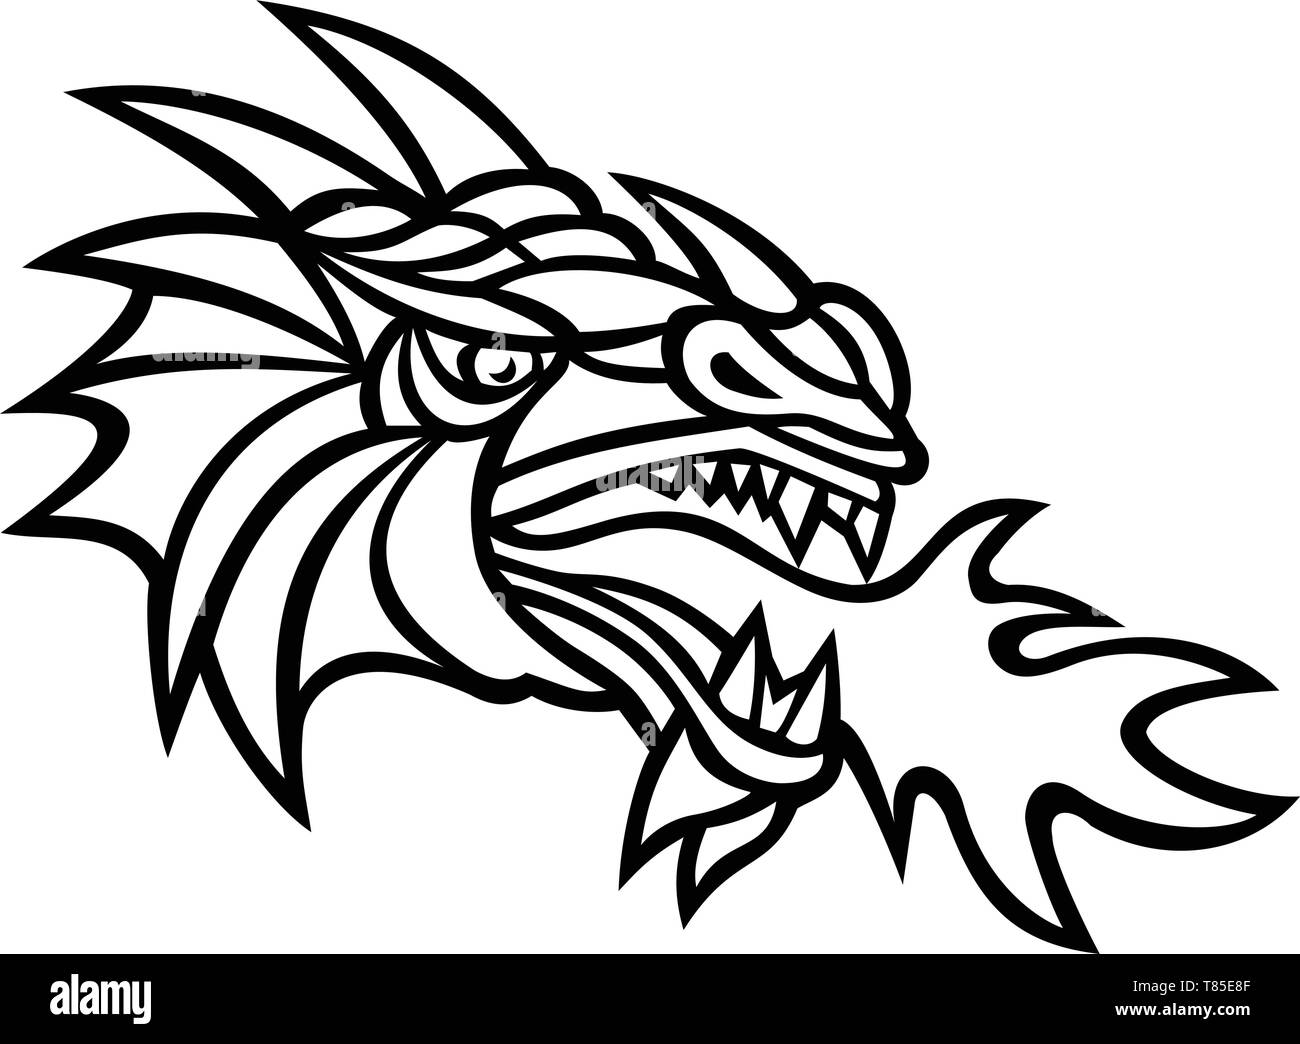 Mascot icon illustration of head of a mythical dragon breathing fire viewed from side on isolated background in retro style done in black and white. Stock Vector